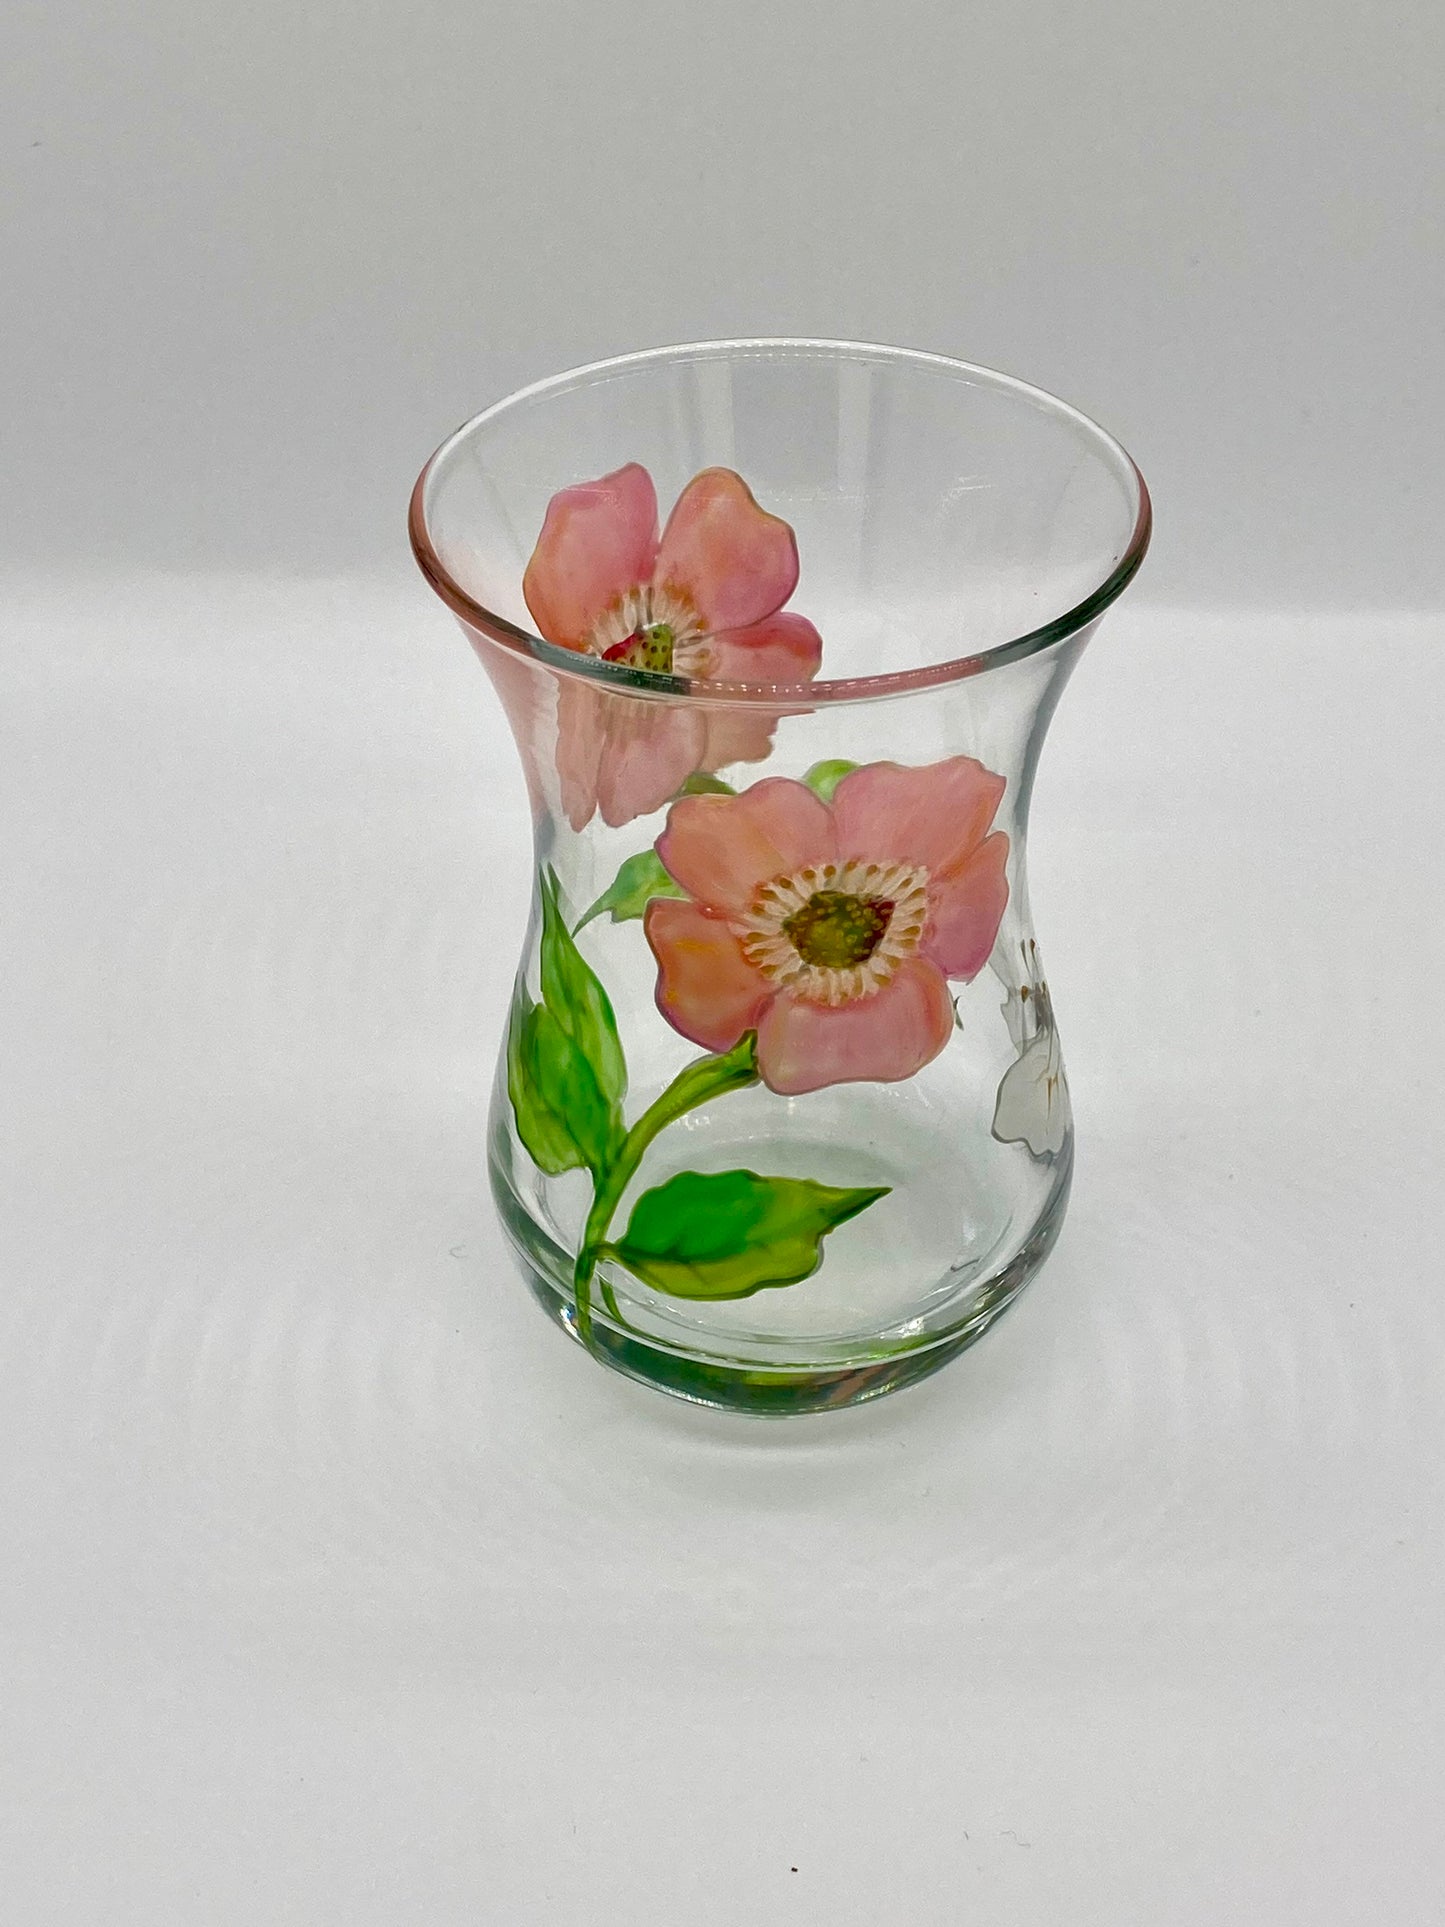 Briar rose and butterfly design mini posy vase